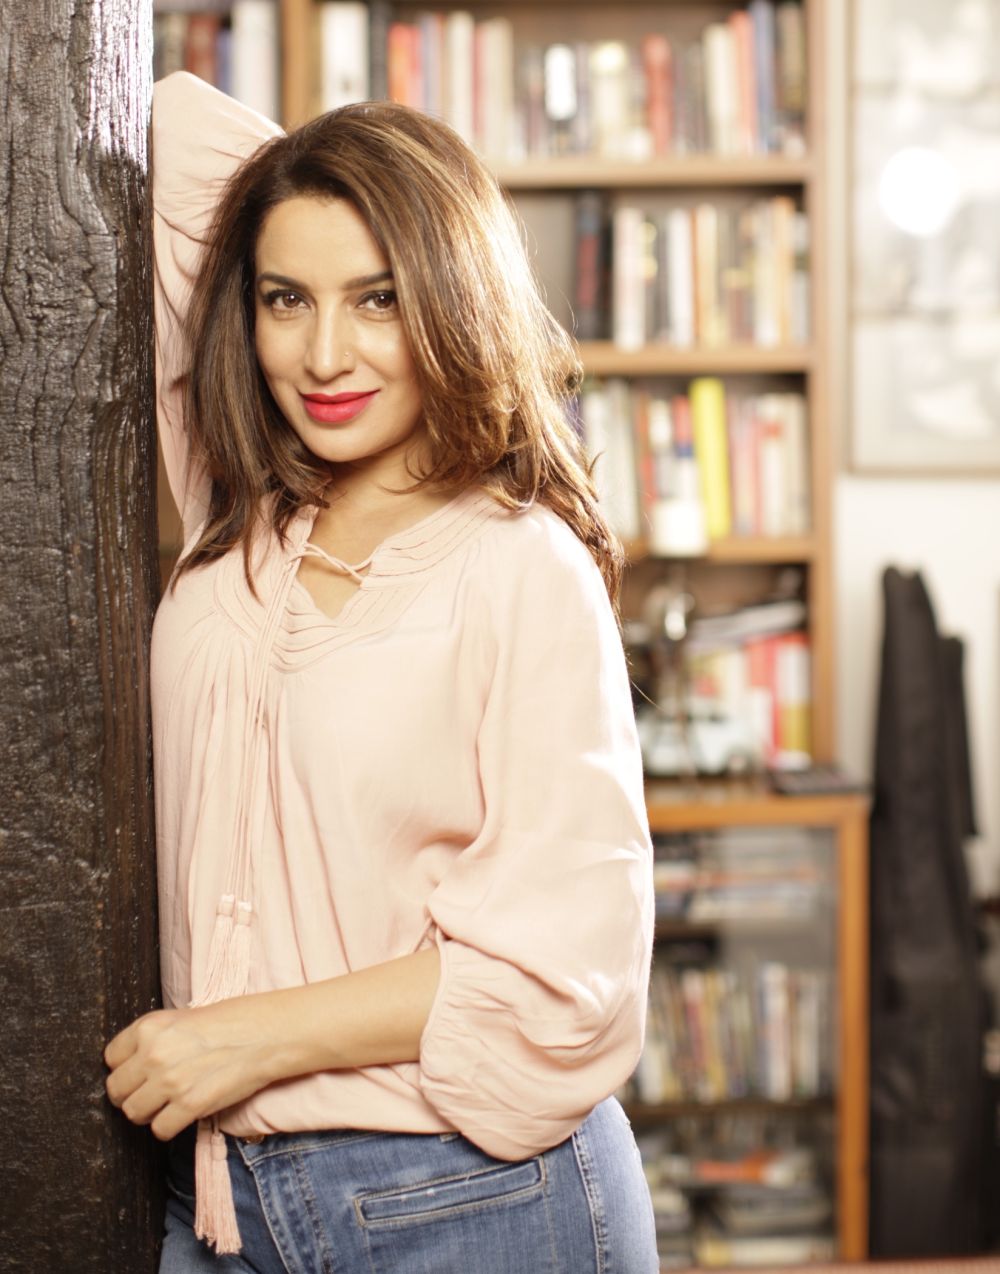 Tisca Chopra Sexy and Hottest Photos , Latest Pics